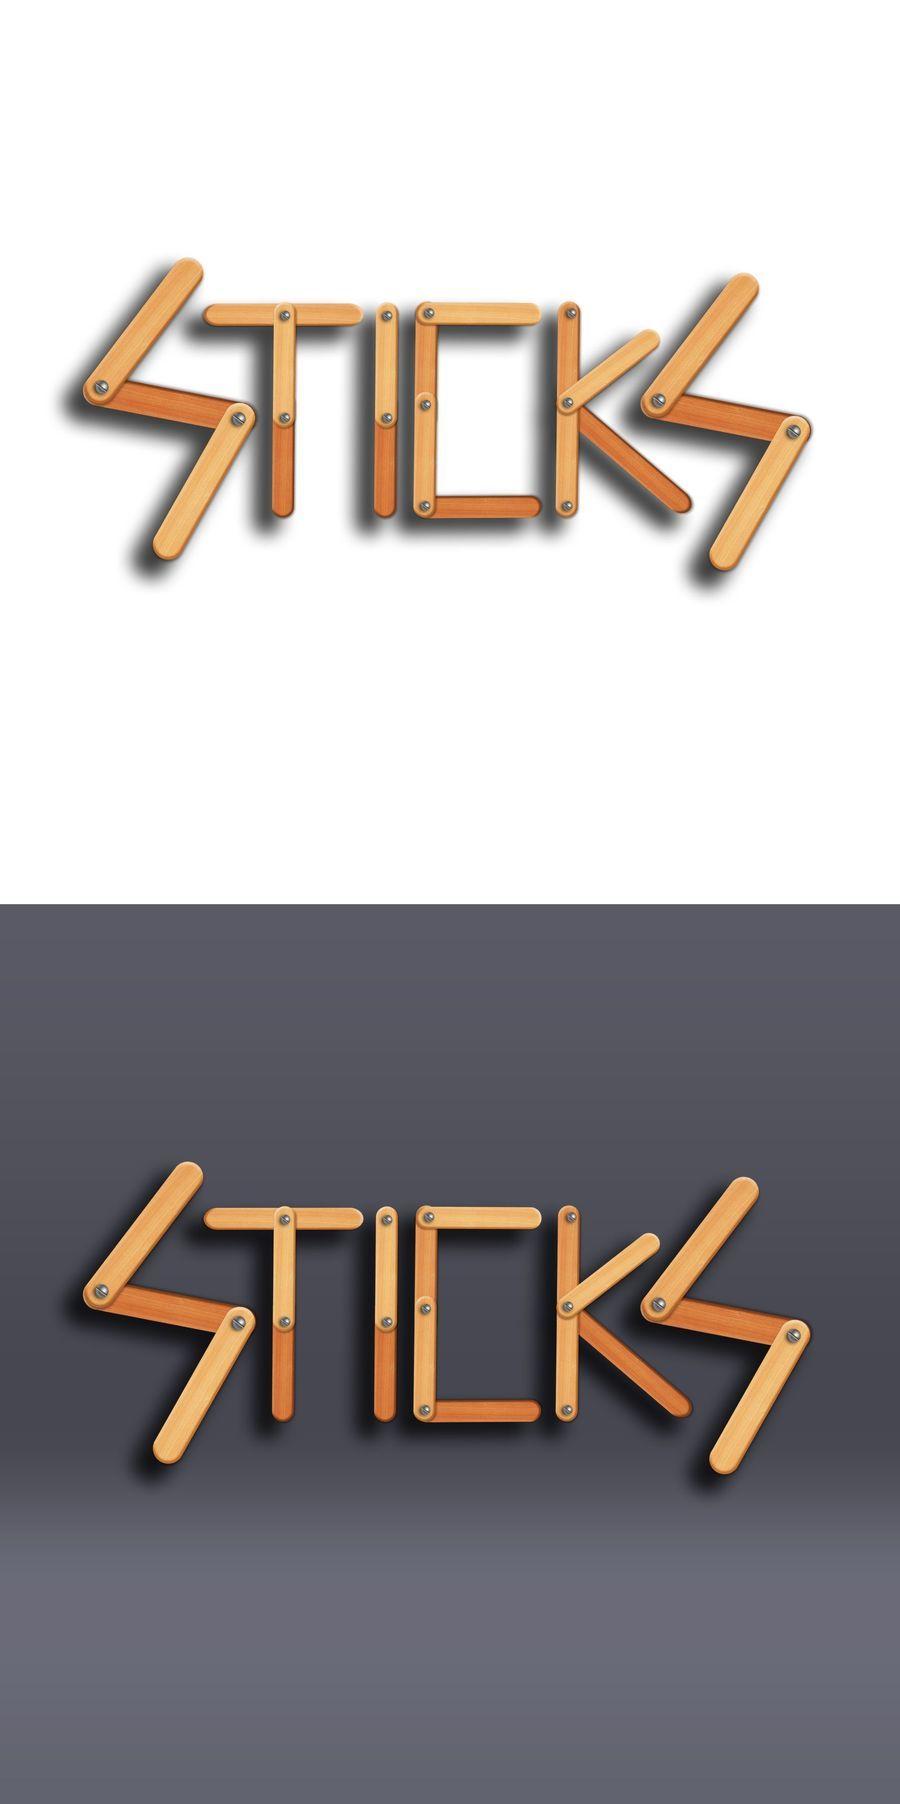 Sticks Logo - Entry by Quintosol for Need a logo/ icon designed for my brand